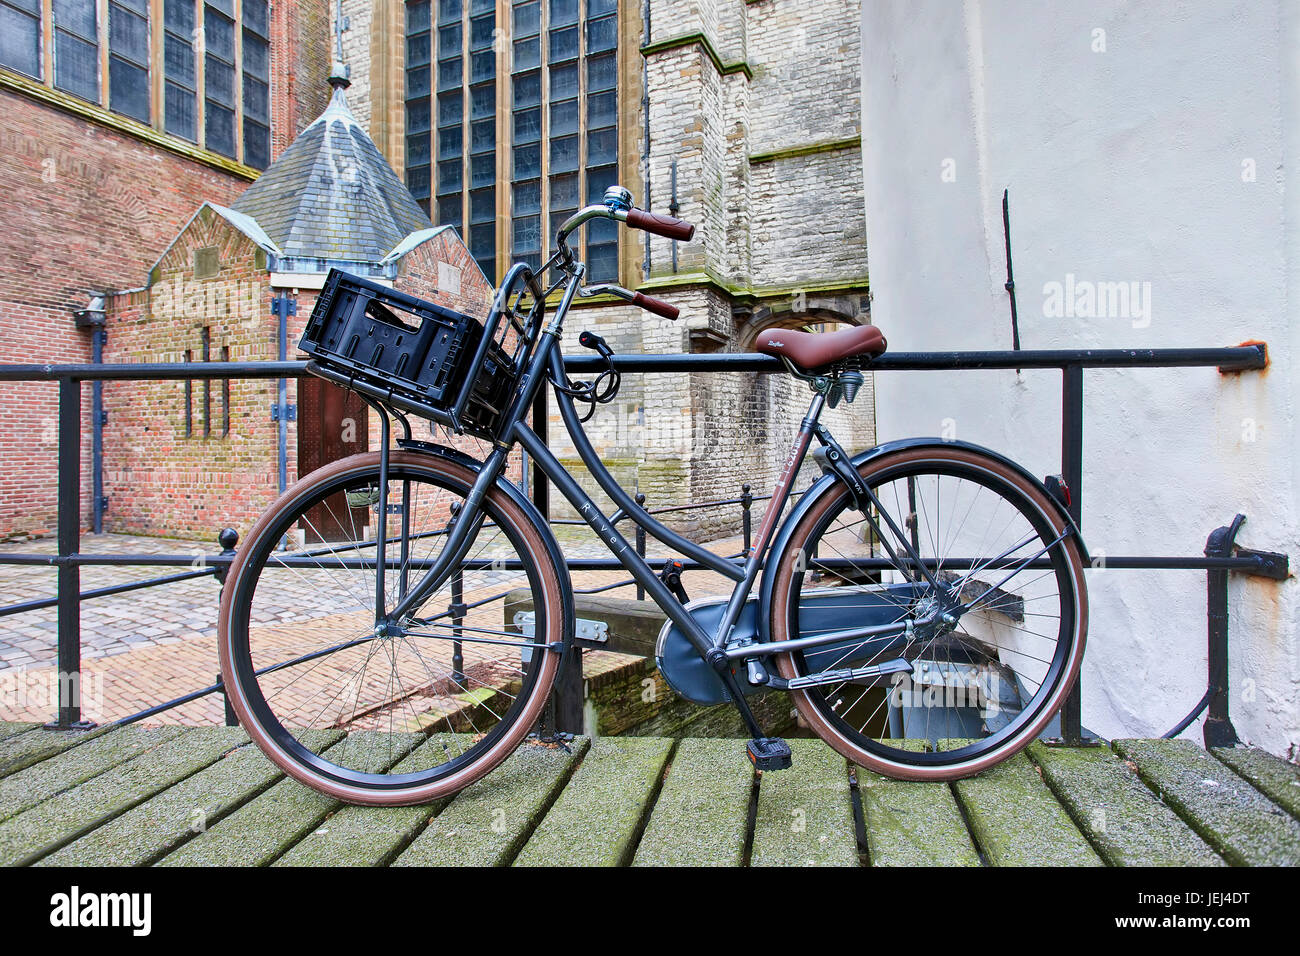 GOUDA-HOLLAND-MARCH 18. Parked Rivel T620 vintage transport bike. Rivel was a Dutch bicycle manufacturer, adopted by Union in 1993. Stock Photo